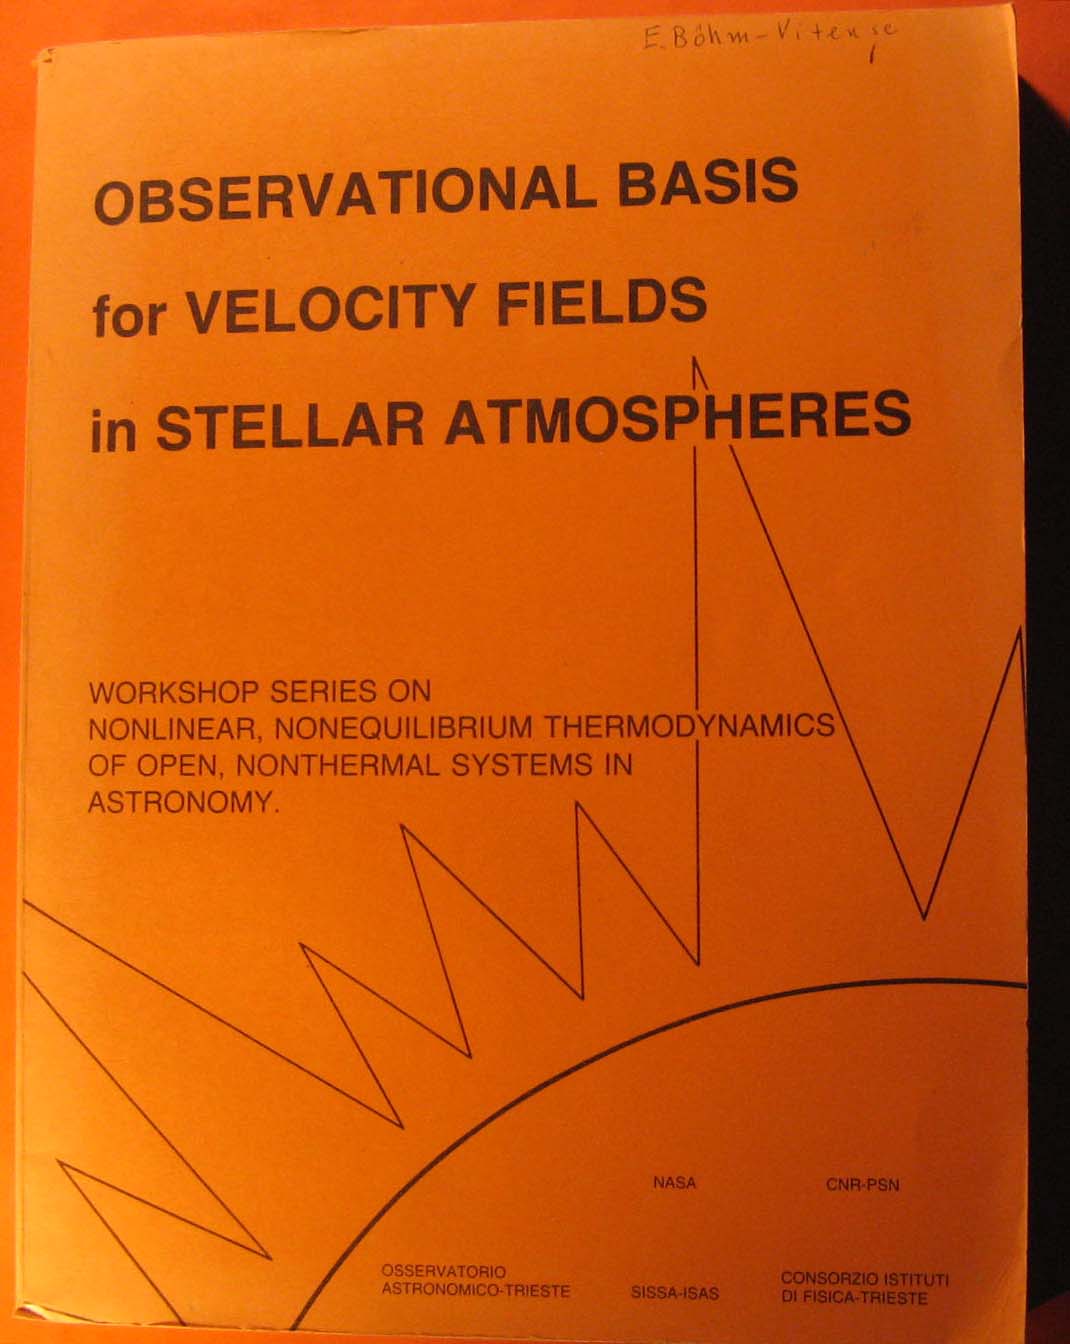 Image for Observational Basis for Velocity Fields in Stellar Atmospheres:  Trieste-workshop series on Nonlinear, Nonequilibrium Thermodynamics of Open, nonthermal Systems in Astronomy 1982 Workshop